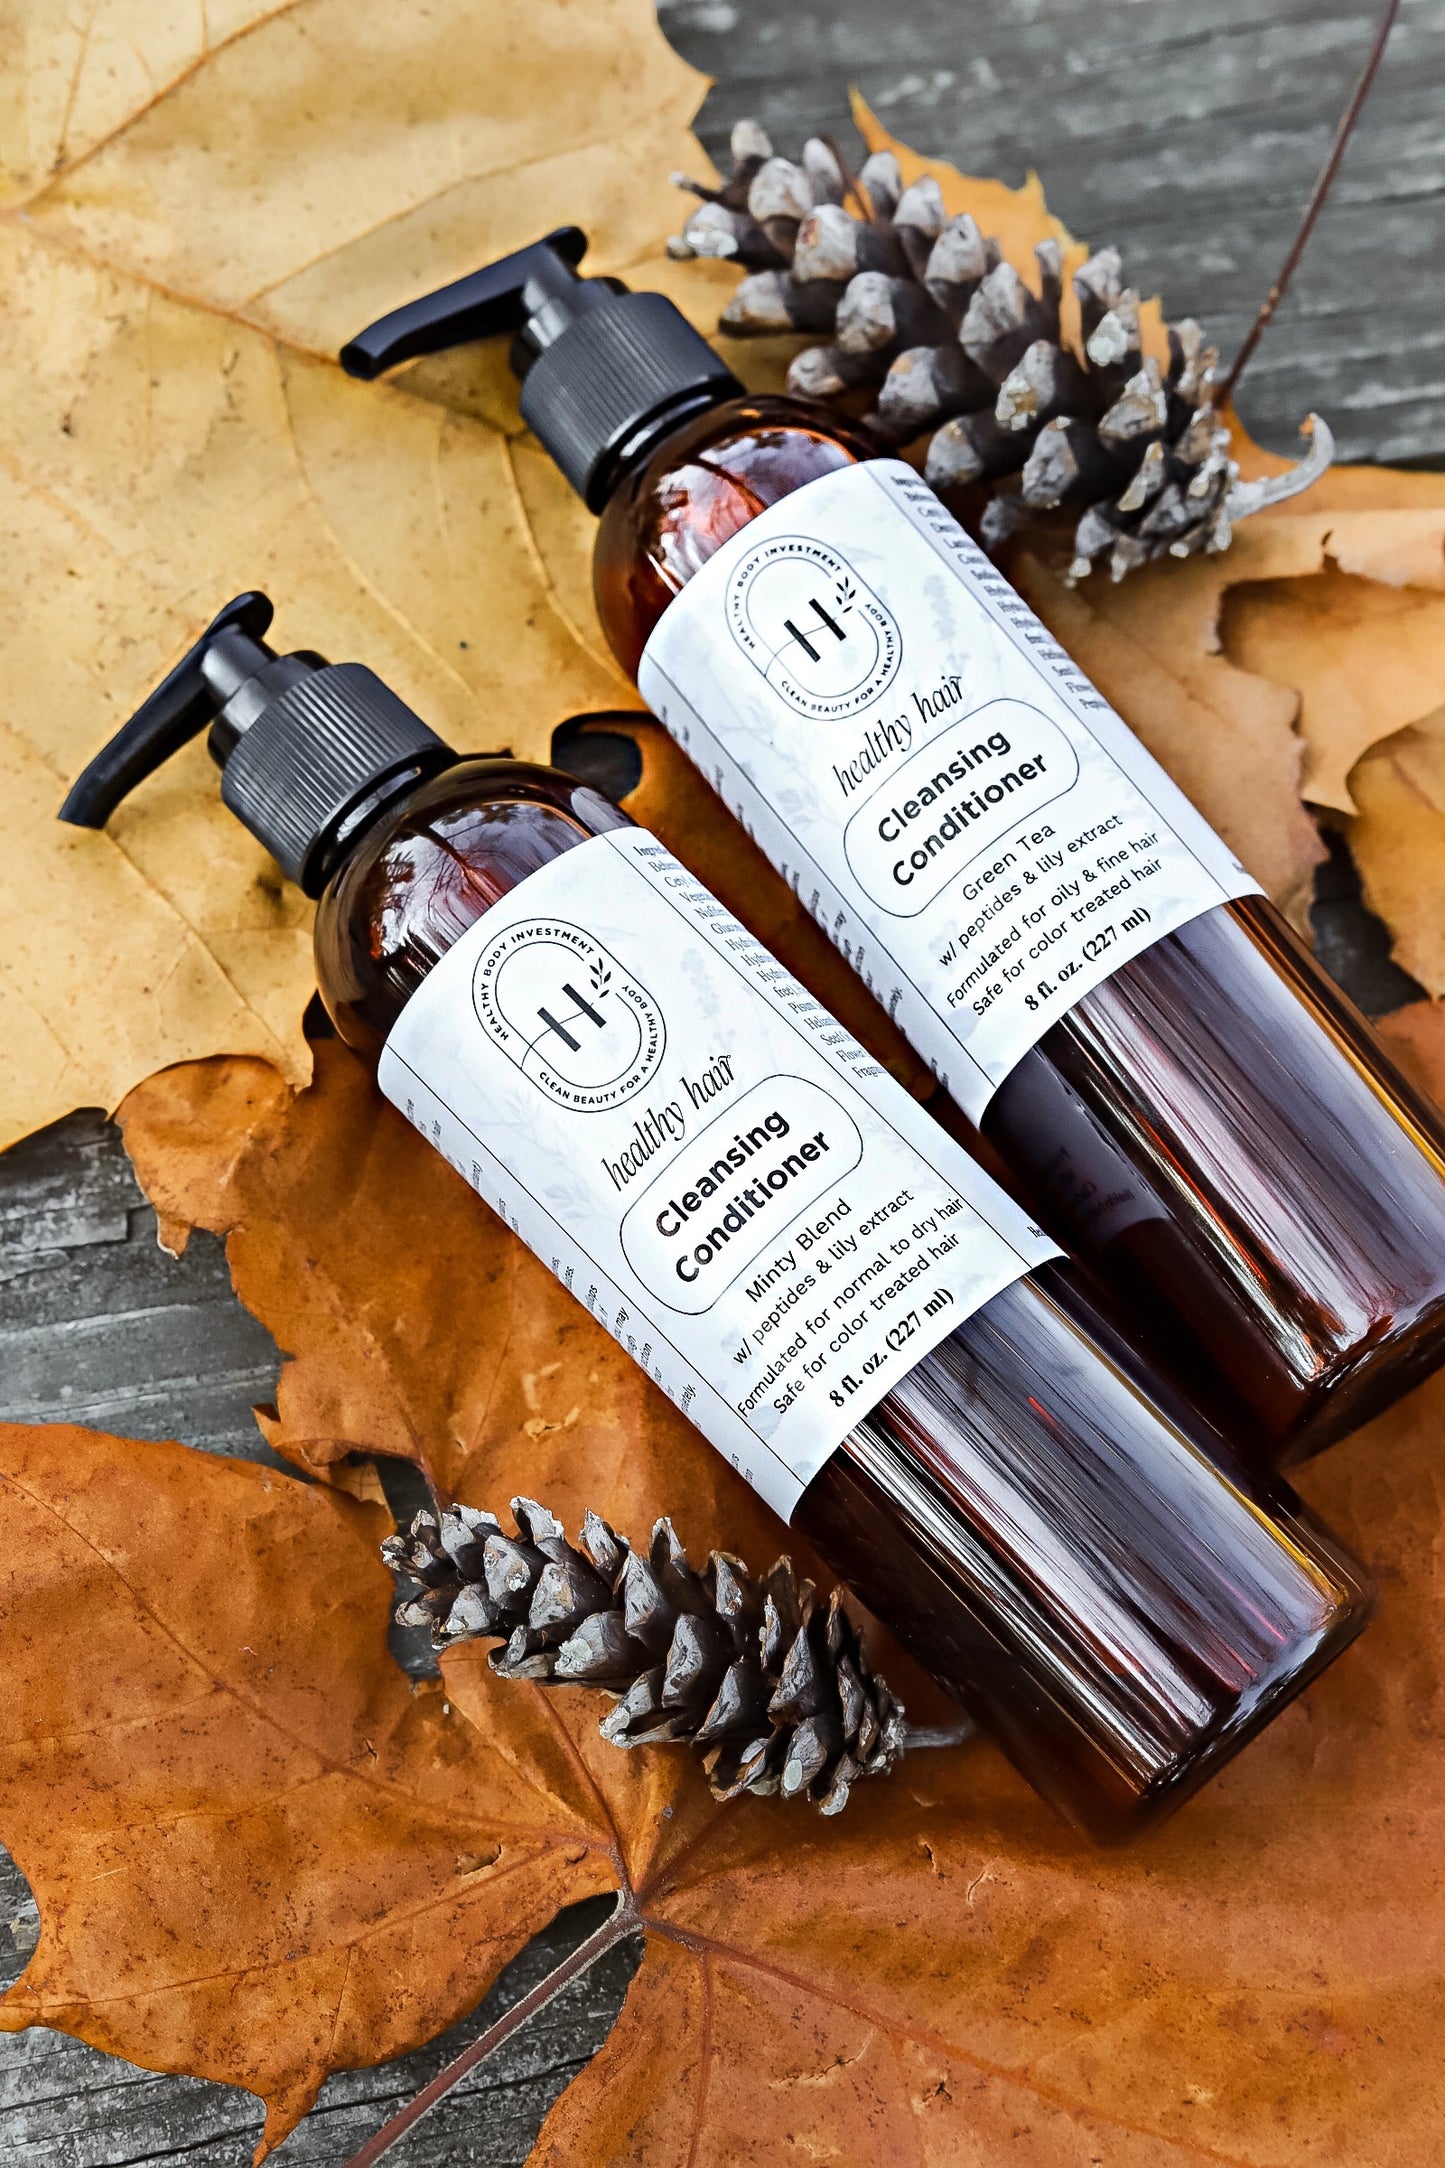 Cleansing Conditioner - Oily or Fine Hair - With Moonstone Crystal